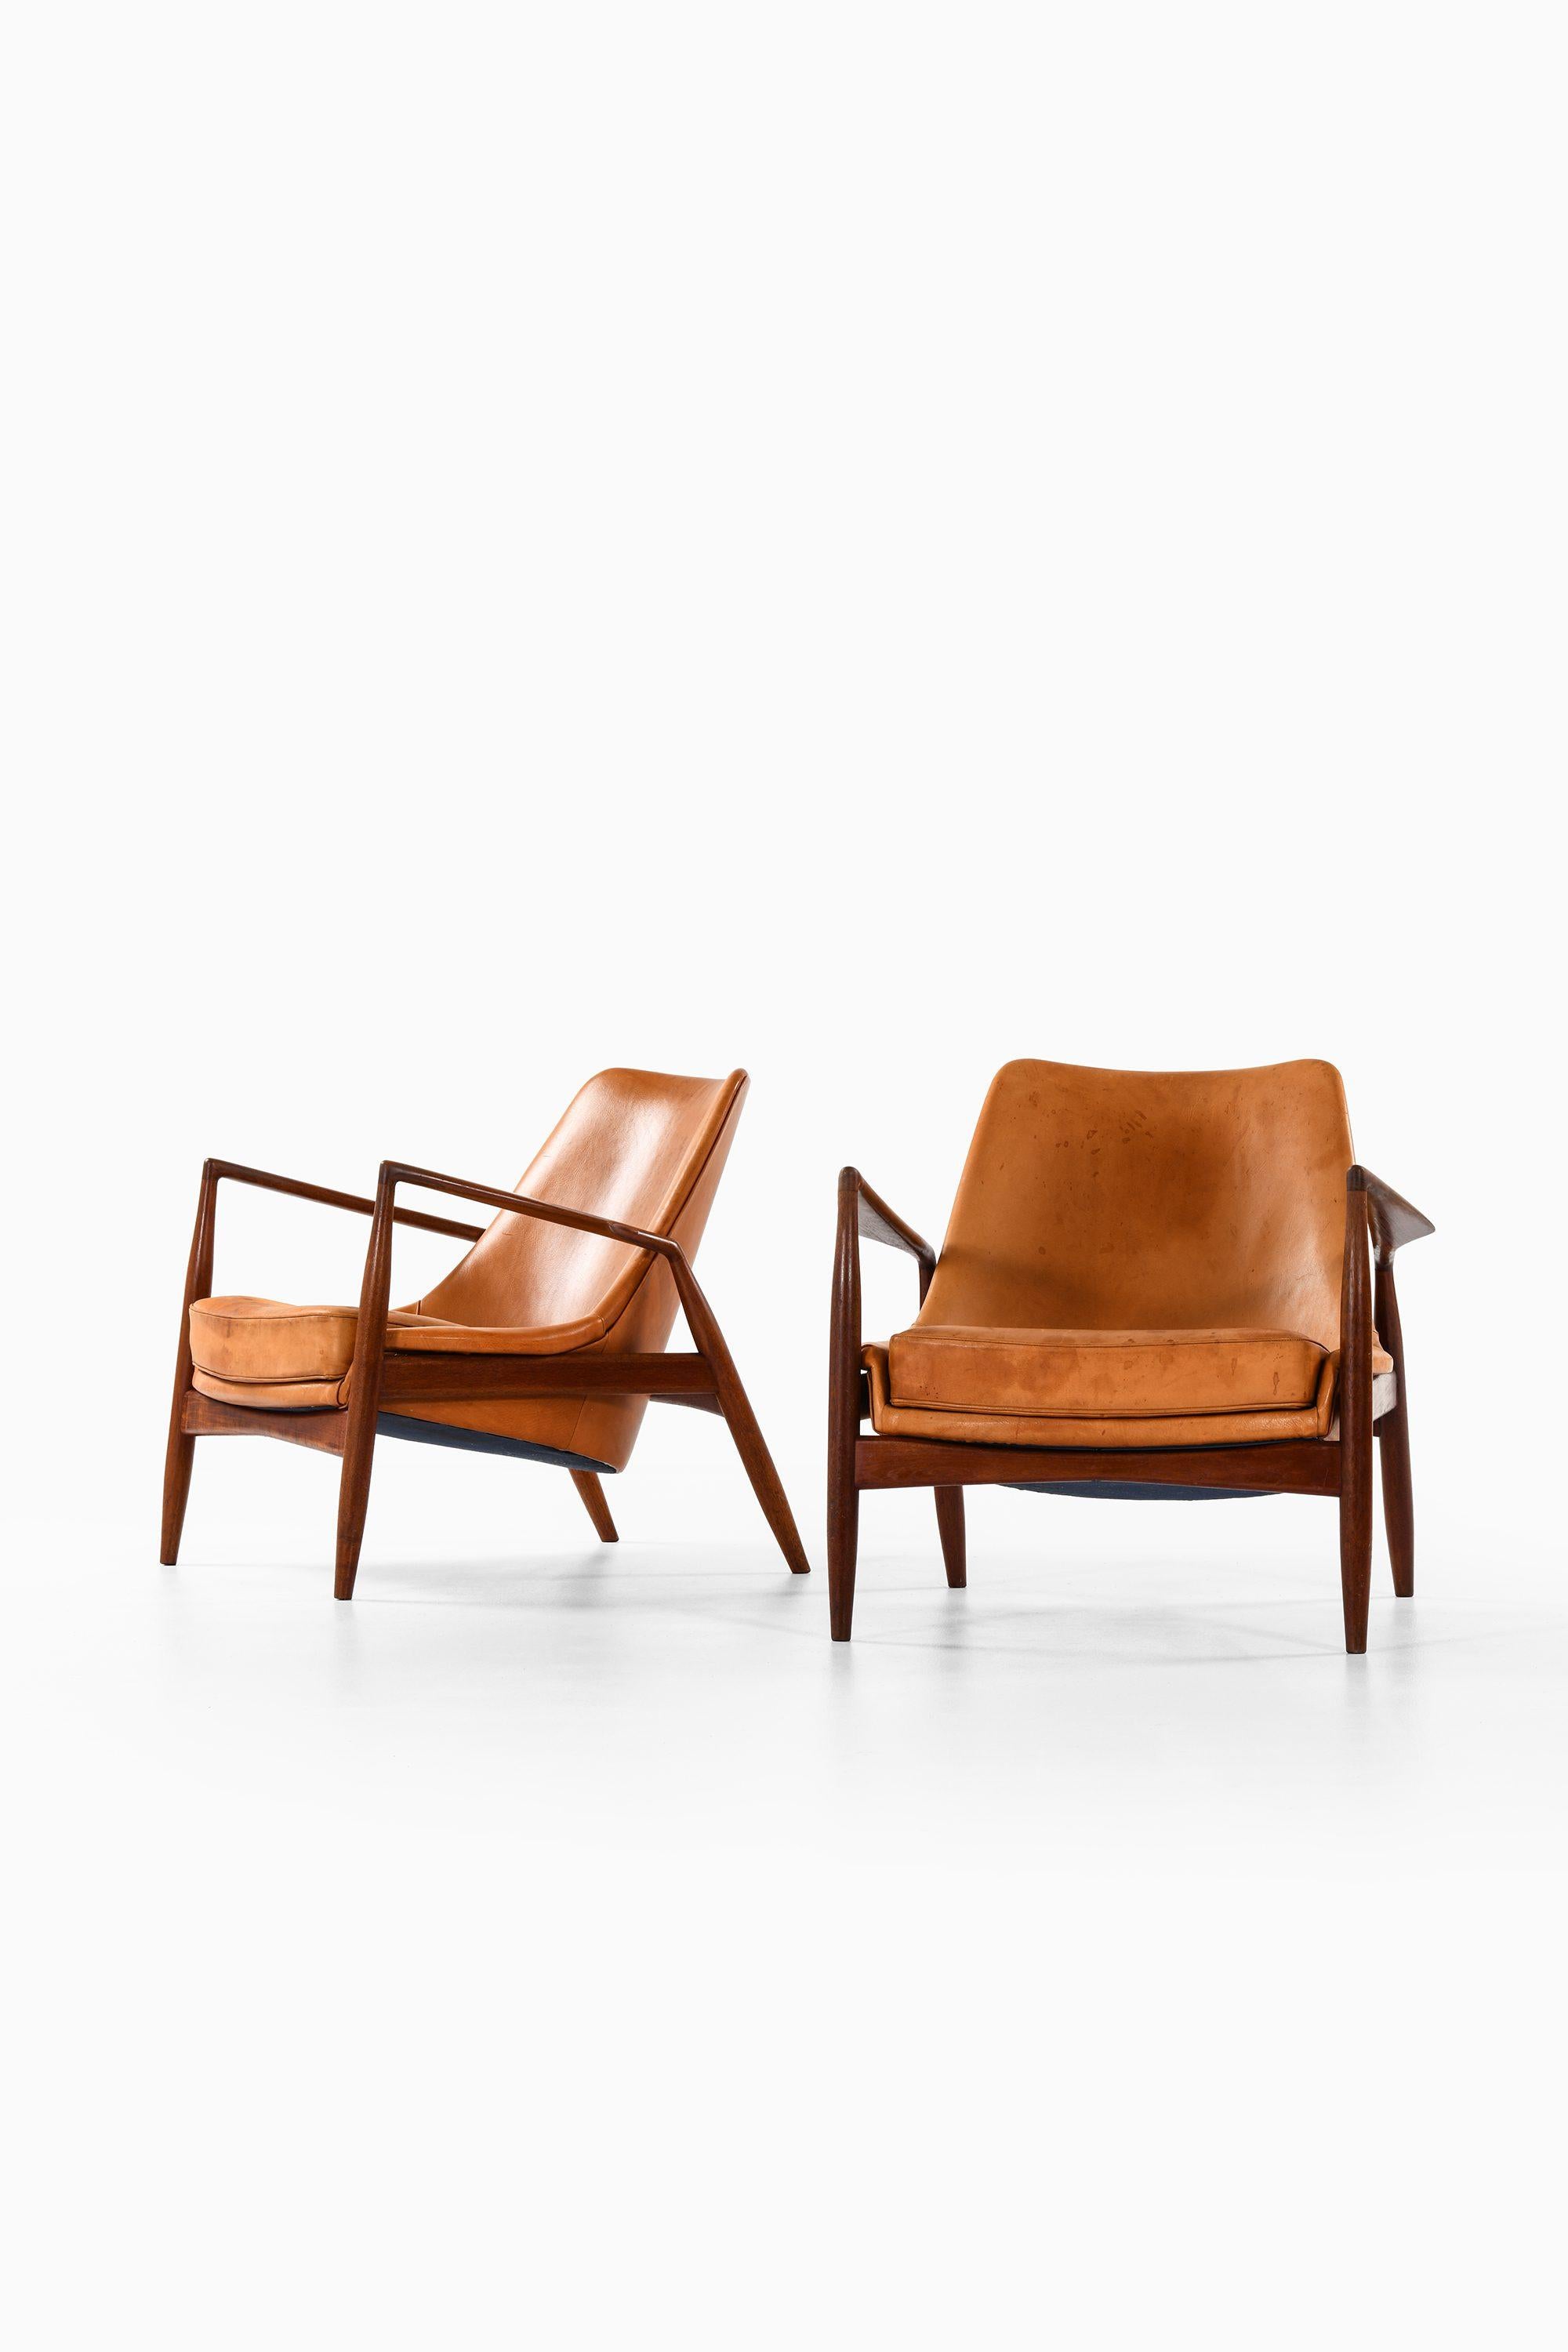 Pair of Easy Chairs in Teak and Leather by Ib Kofod-Larsen, 1950s

Additional Information:
Material: Teak and original cognac brown leather
Style: midcentury, Scandinavian
Rare pair of easy chairs model Sälen/Seal
Produced by OPE in